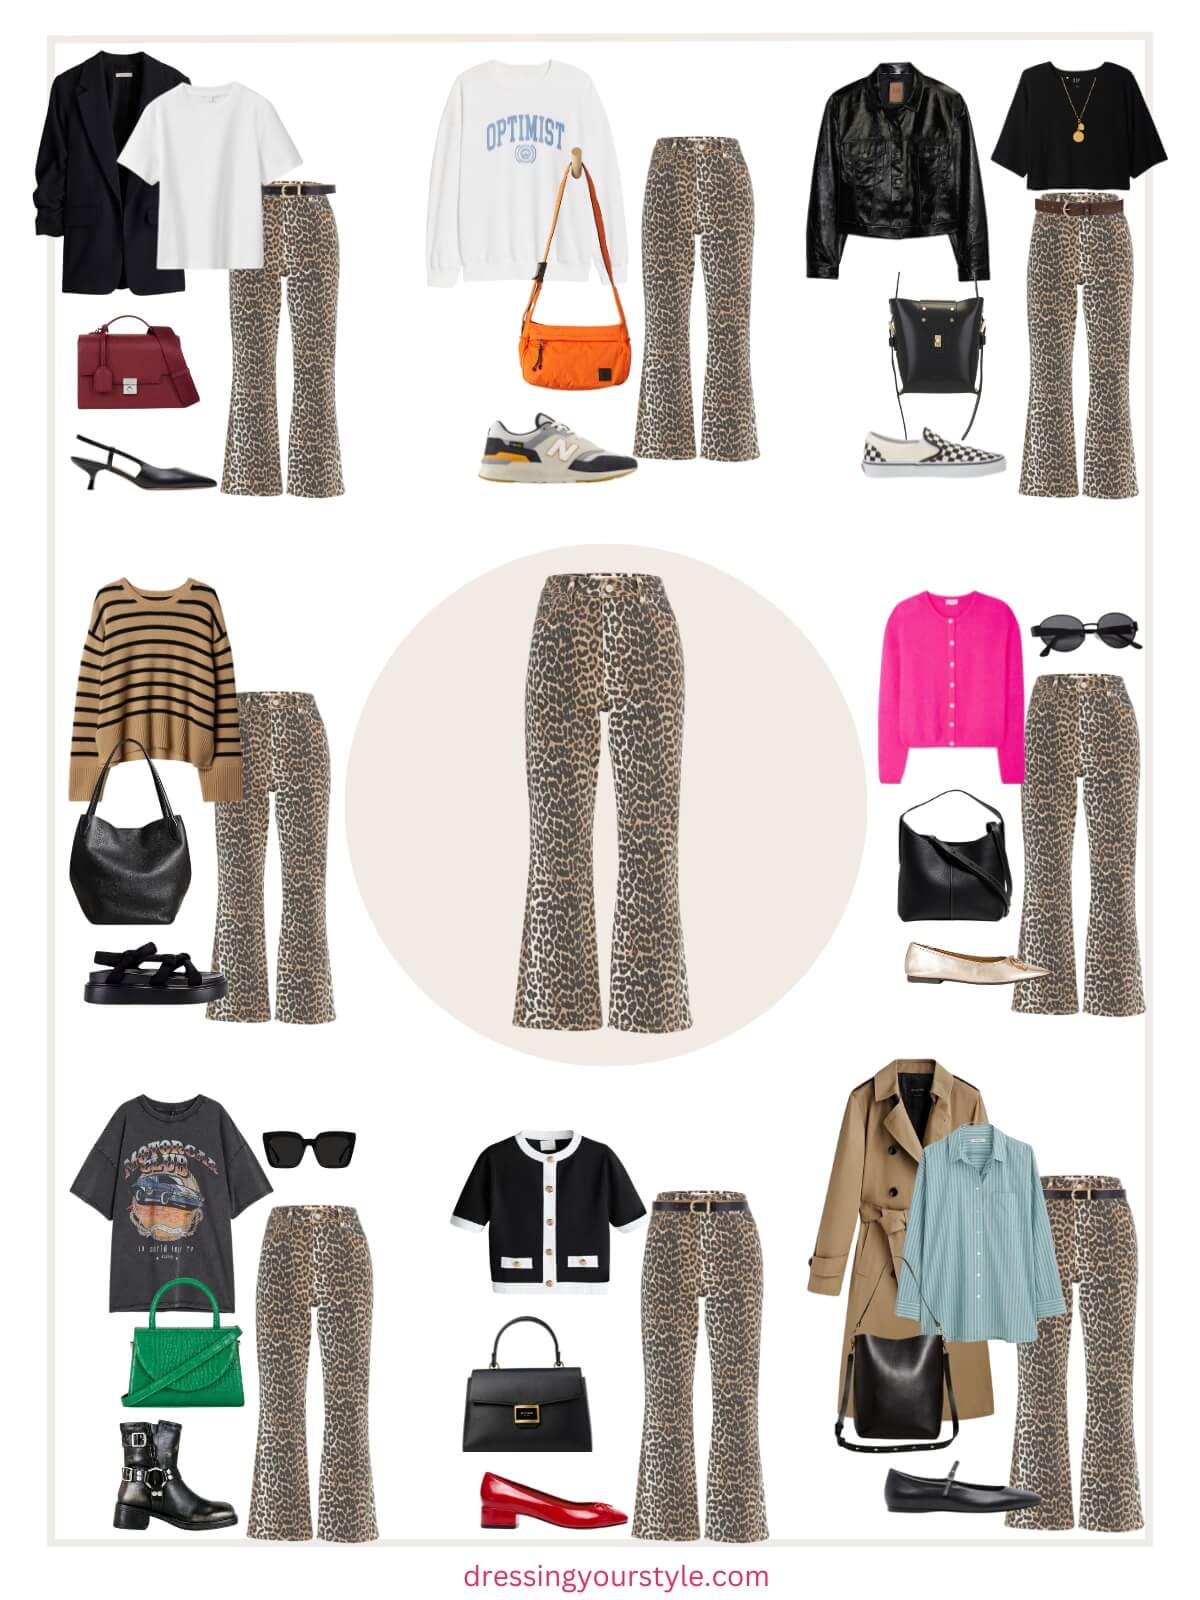 Those Ganni Leopard Print Pants Styled 12 Ways for Spring